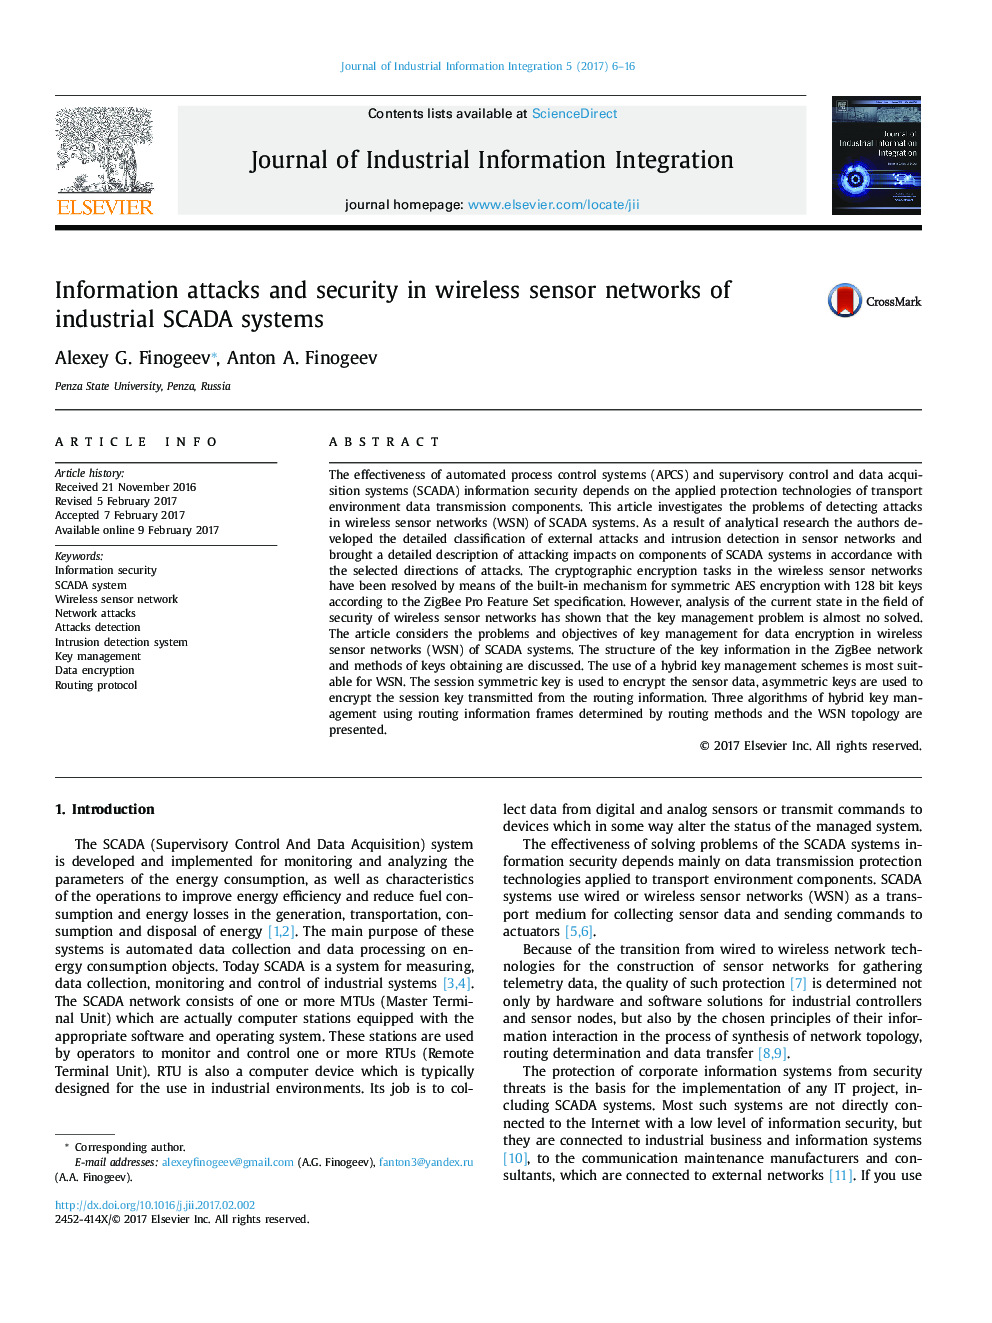 Information attacks and security in wireless sensor networks of industrial SCADA systems